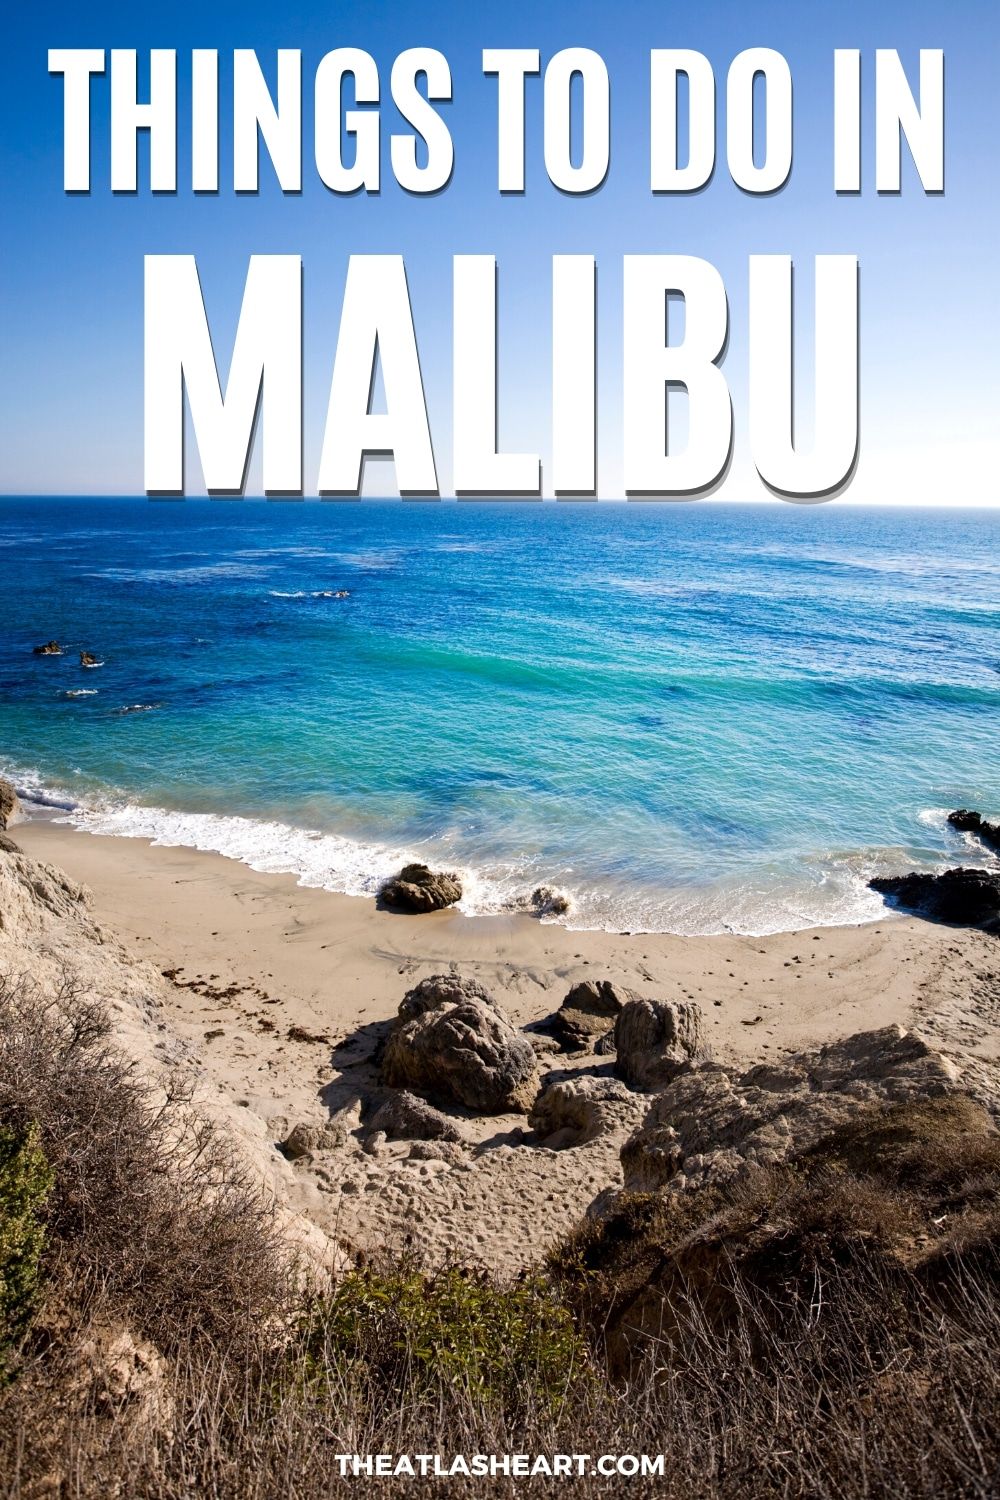 41 Best Things to do in Malibu, California [From Beaches to Hidden Local Spots]